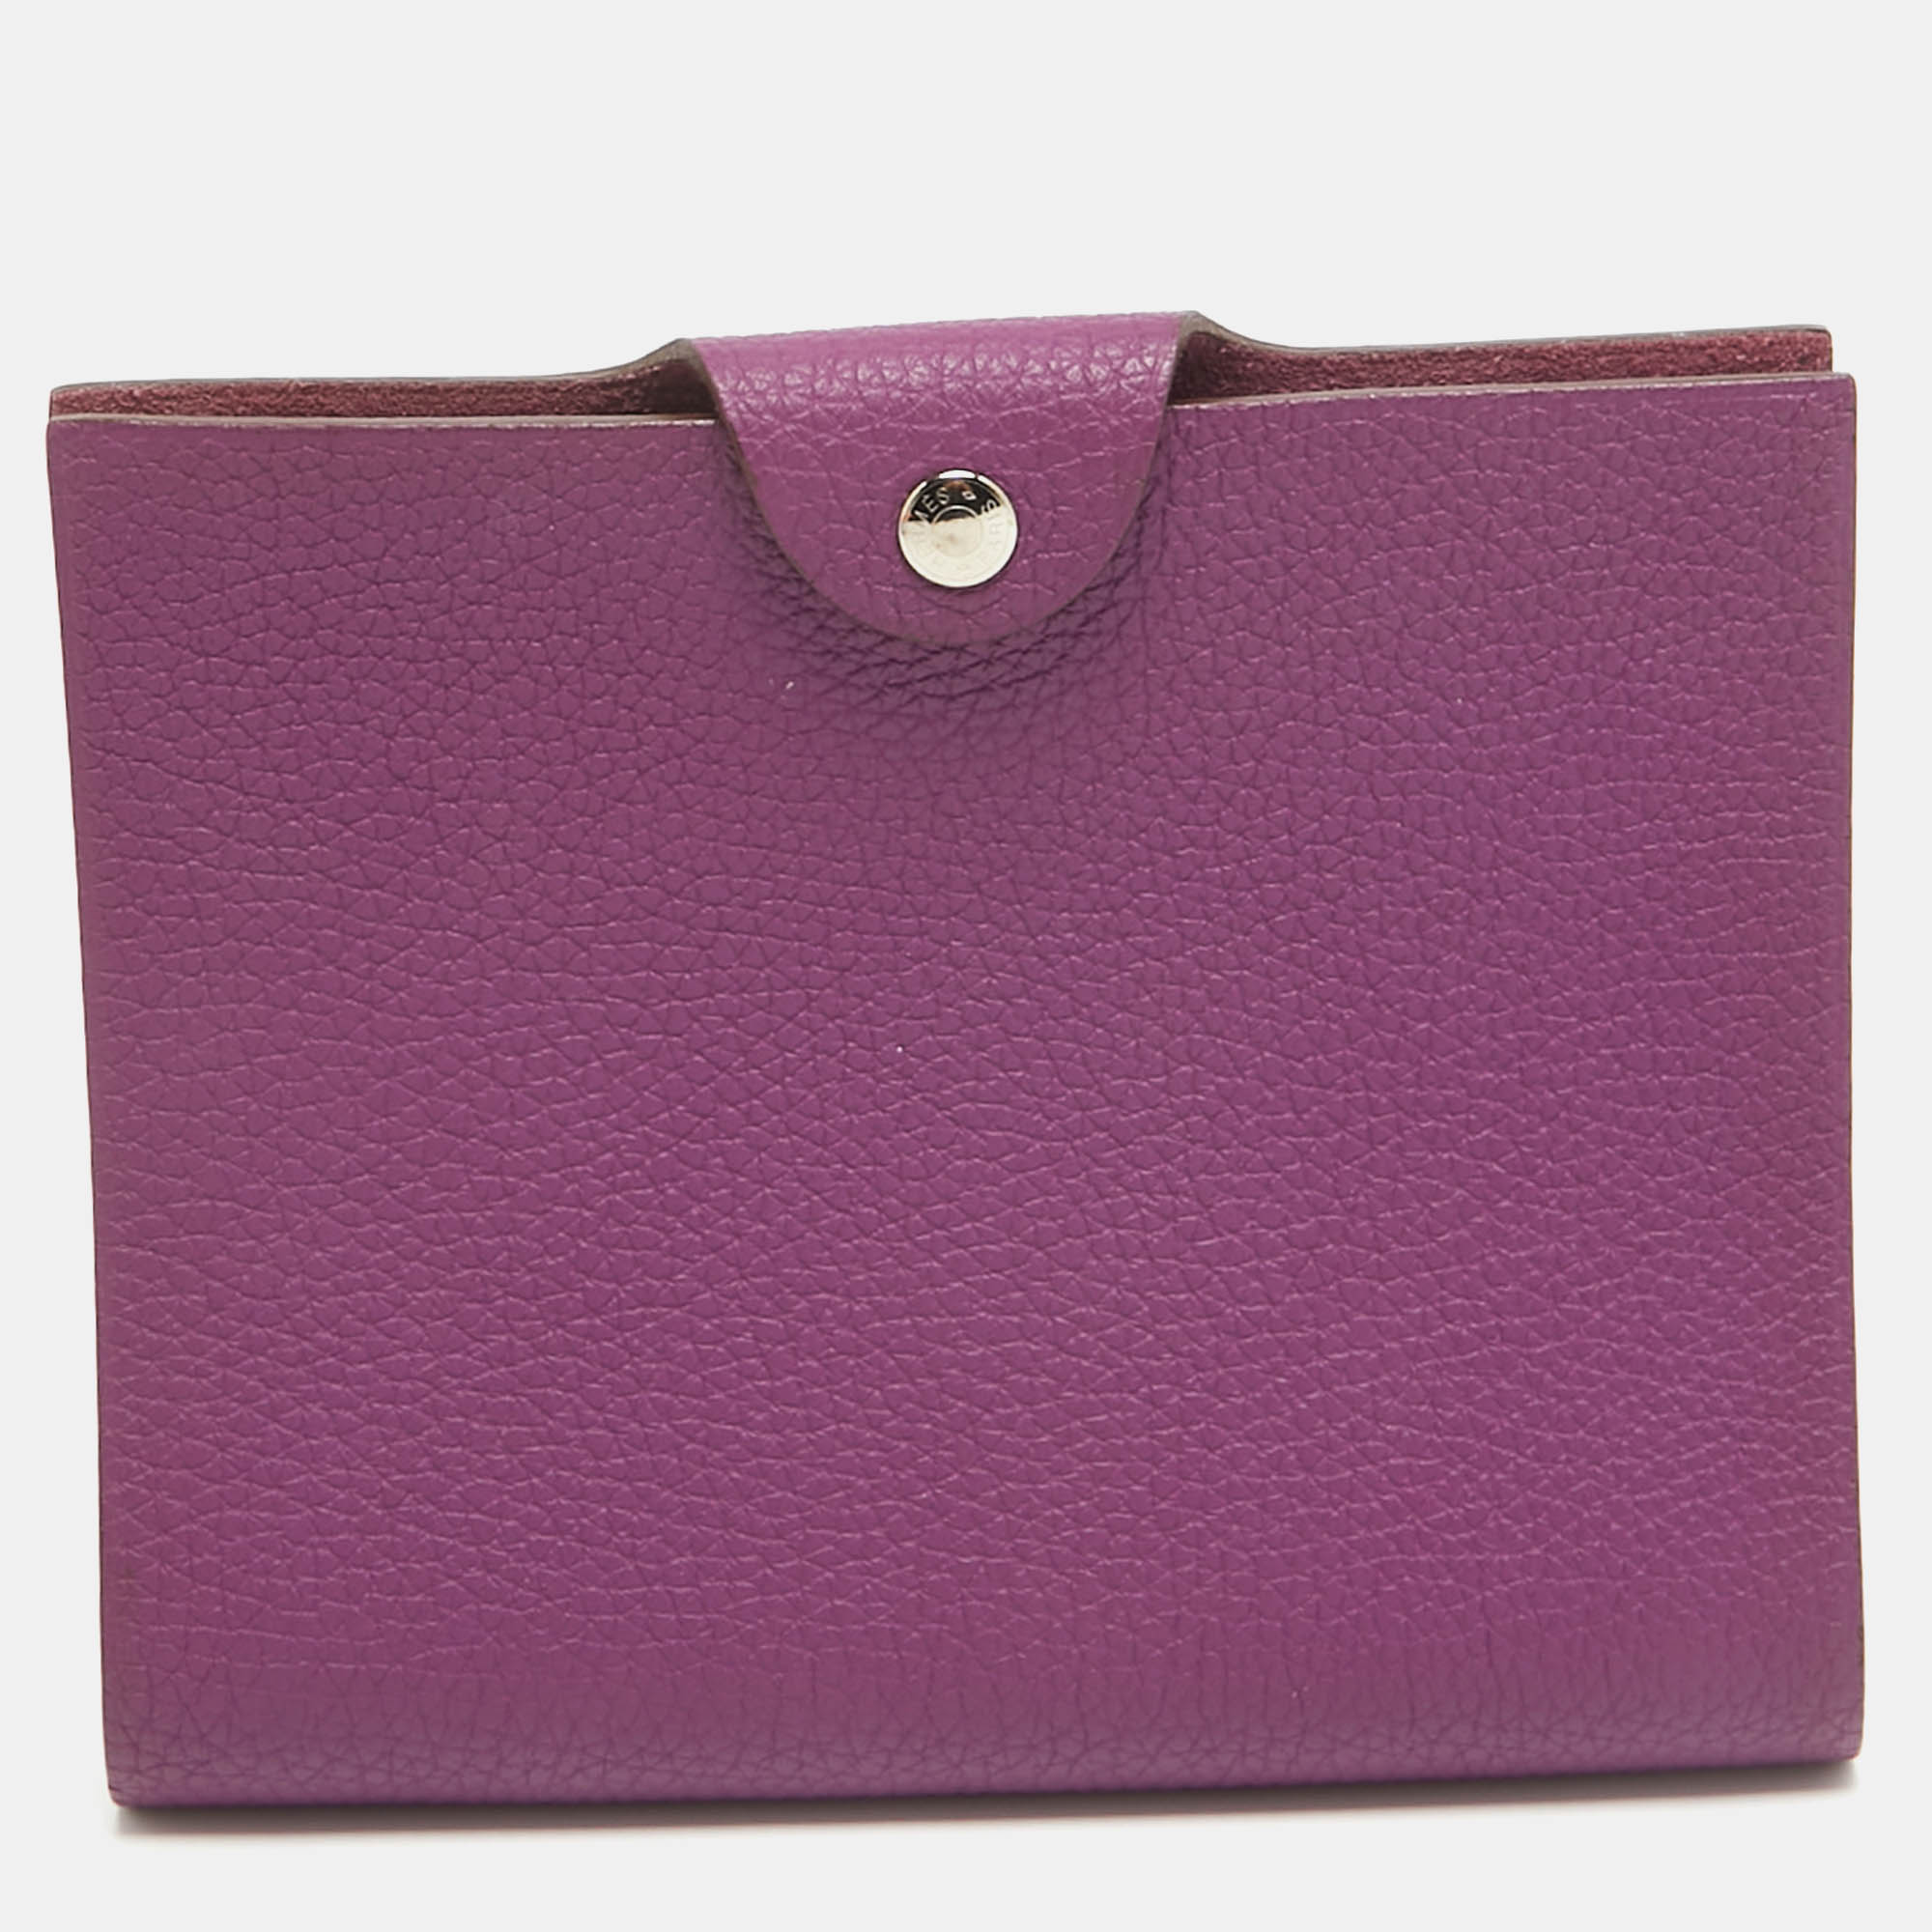 Hermes Anemone Togo Leather Ulysse PM Notebook Cover